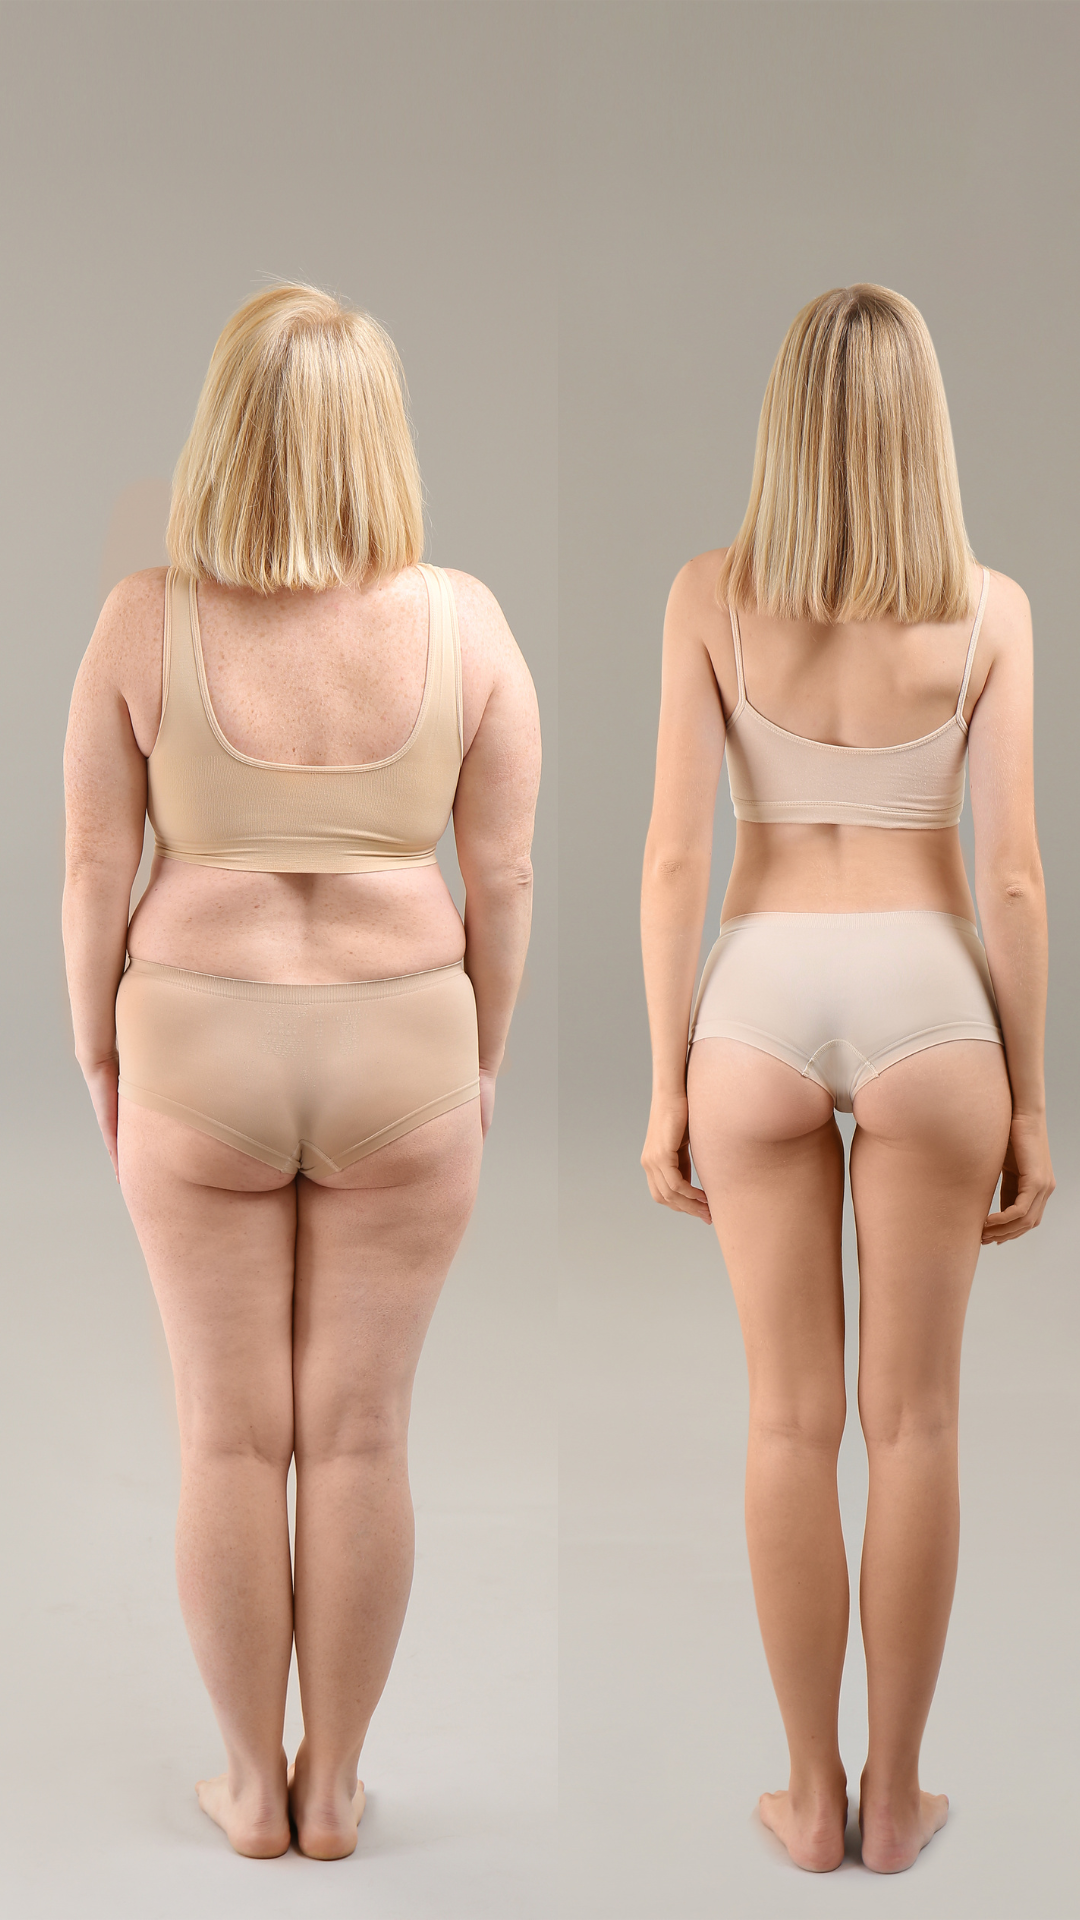 Flanks liposuction NYC - Best Flanks liposuction in NYC